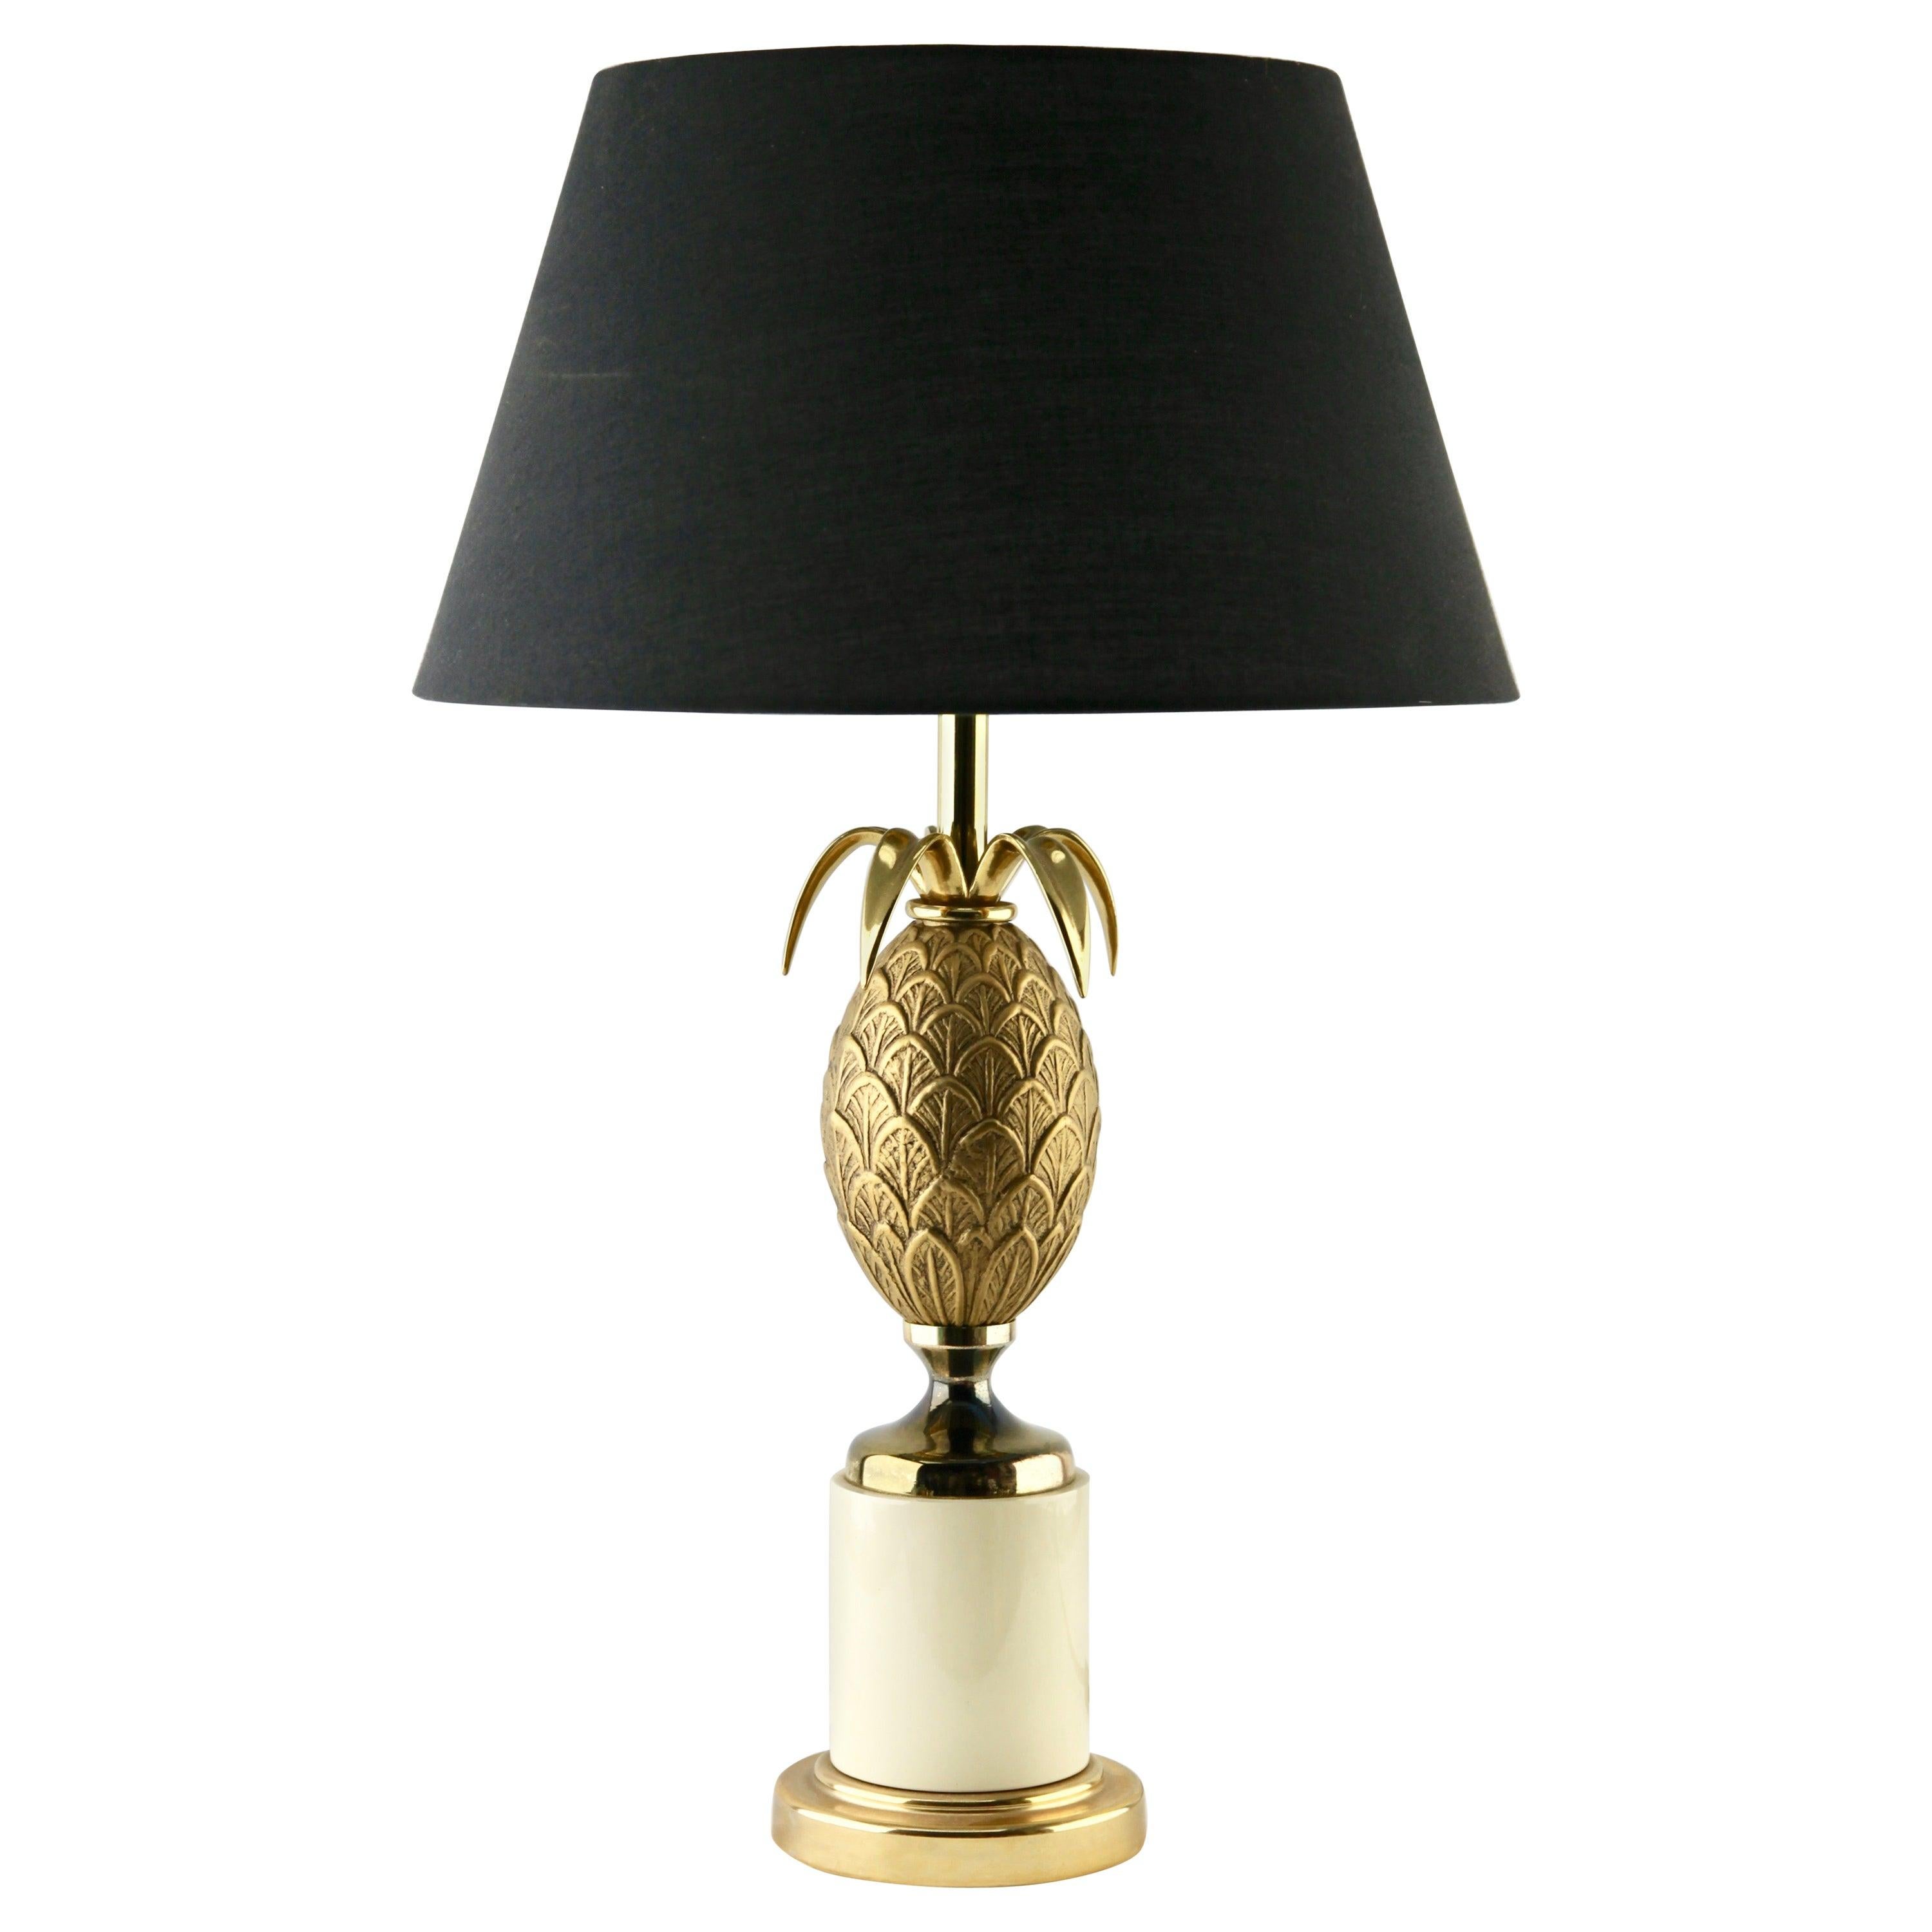 Brass pineapple table lamp, Maison Jansen style, Hollywood Regency -  Occasion | auctionlab